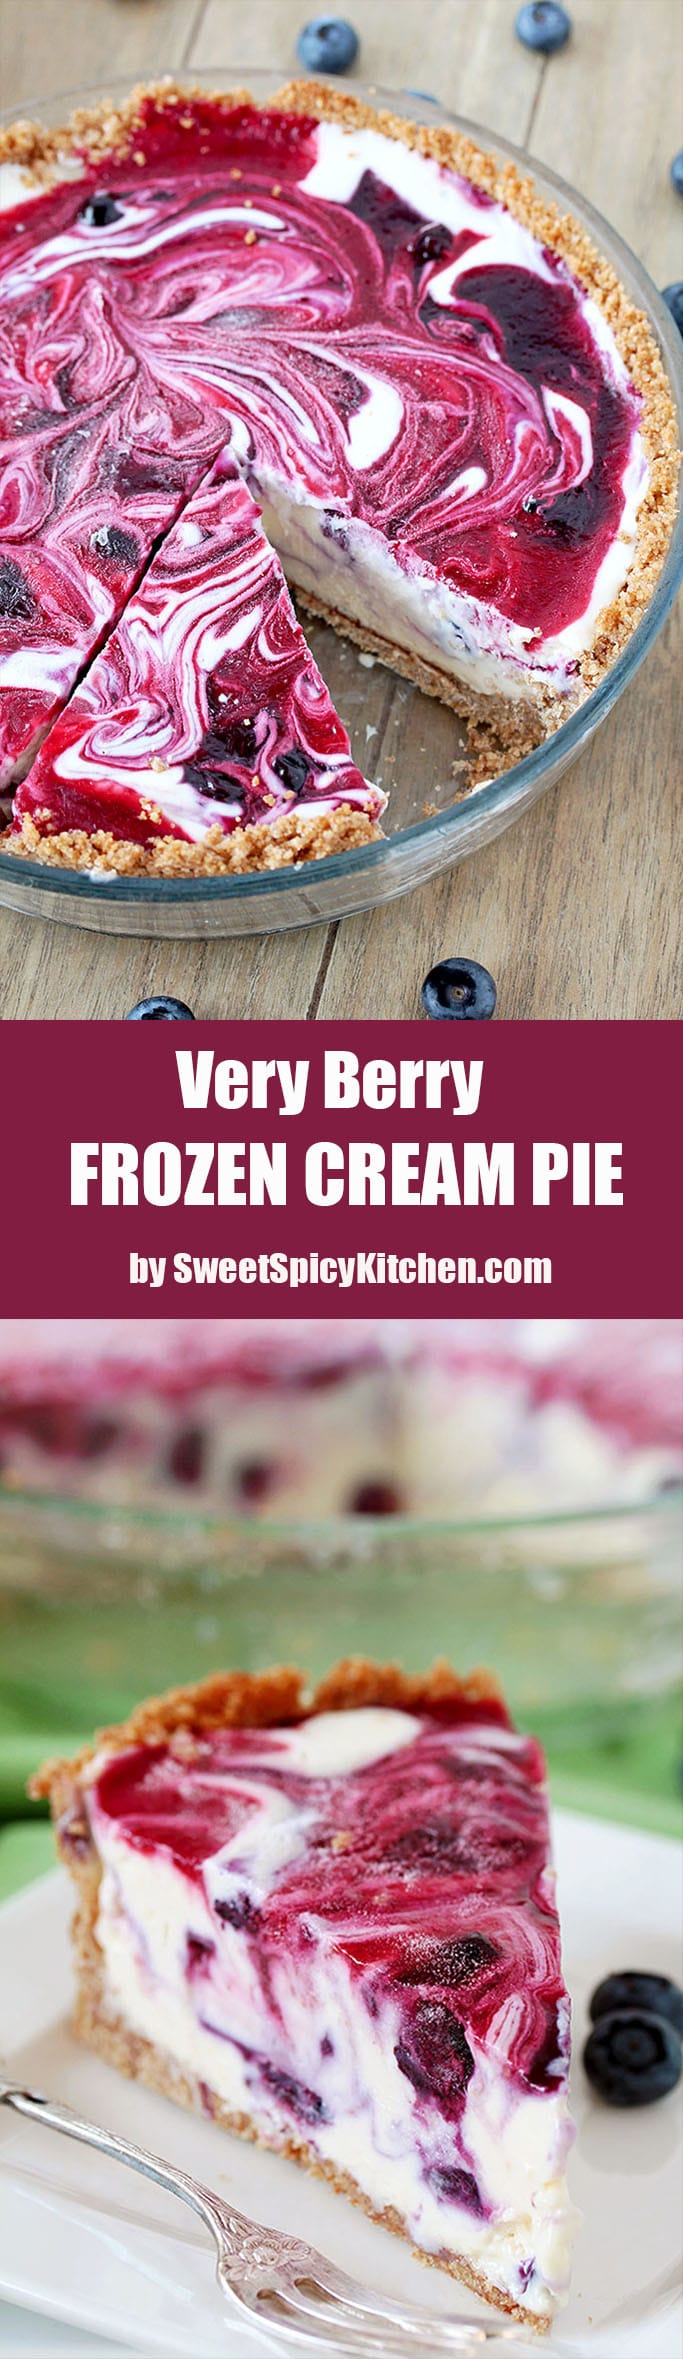 Very Berry Frozen Cream Pie is a dessert with fresh season blueberries and raspberries, just perfect refreshment for hot summer days. If you like ice cream, especially fruit, you will love this pie. This is one of my favorite summer desserts. Graham cracker pie crust, frozen creamy filling, swirls with homemade blueberry and raspberry sauce… Pure perfection, if you ask me.